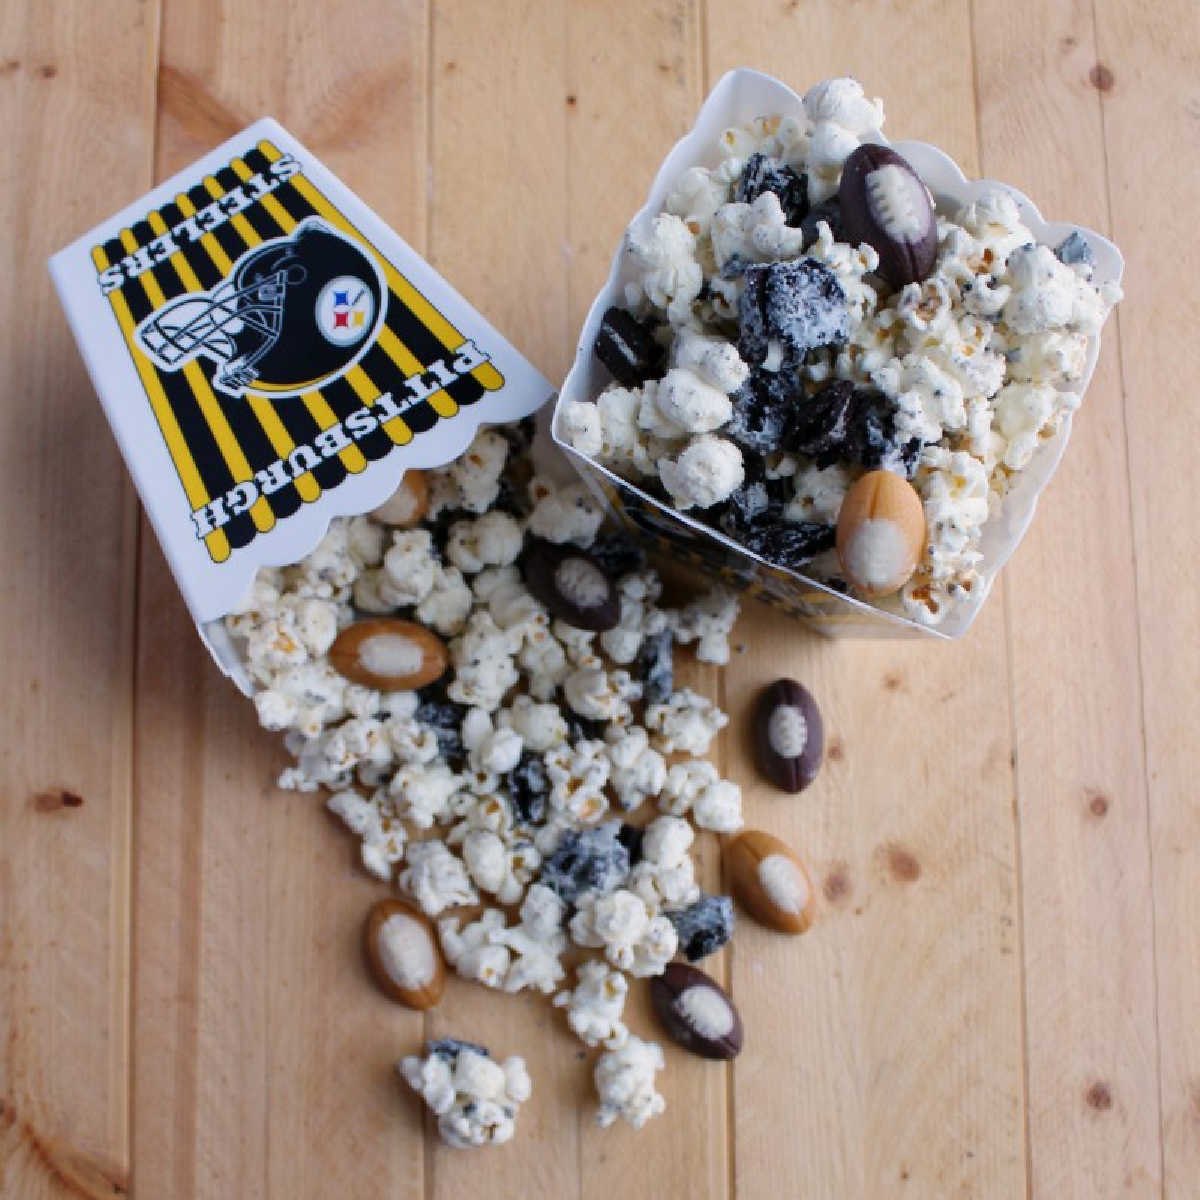 Plastic tubs of cookies and cream popcorn with white chocolate and bits of Oreo cookies, ready to eat.